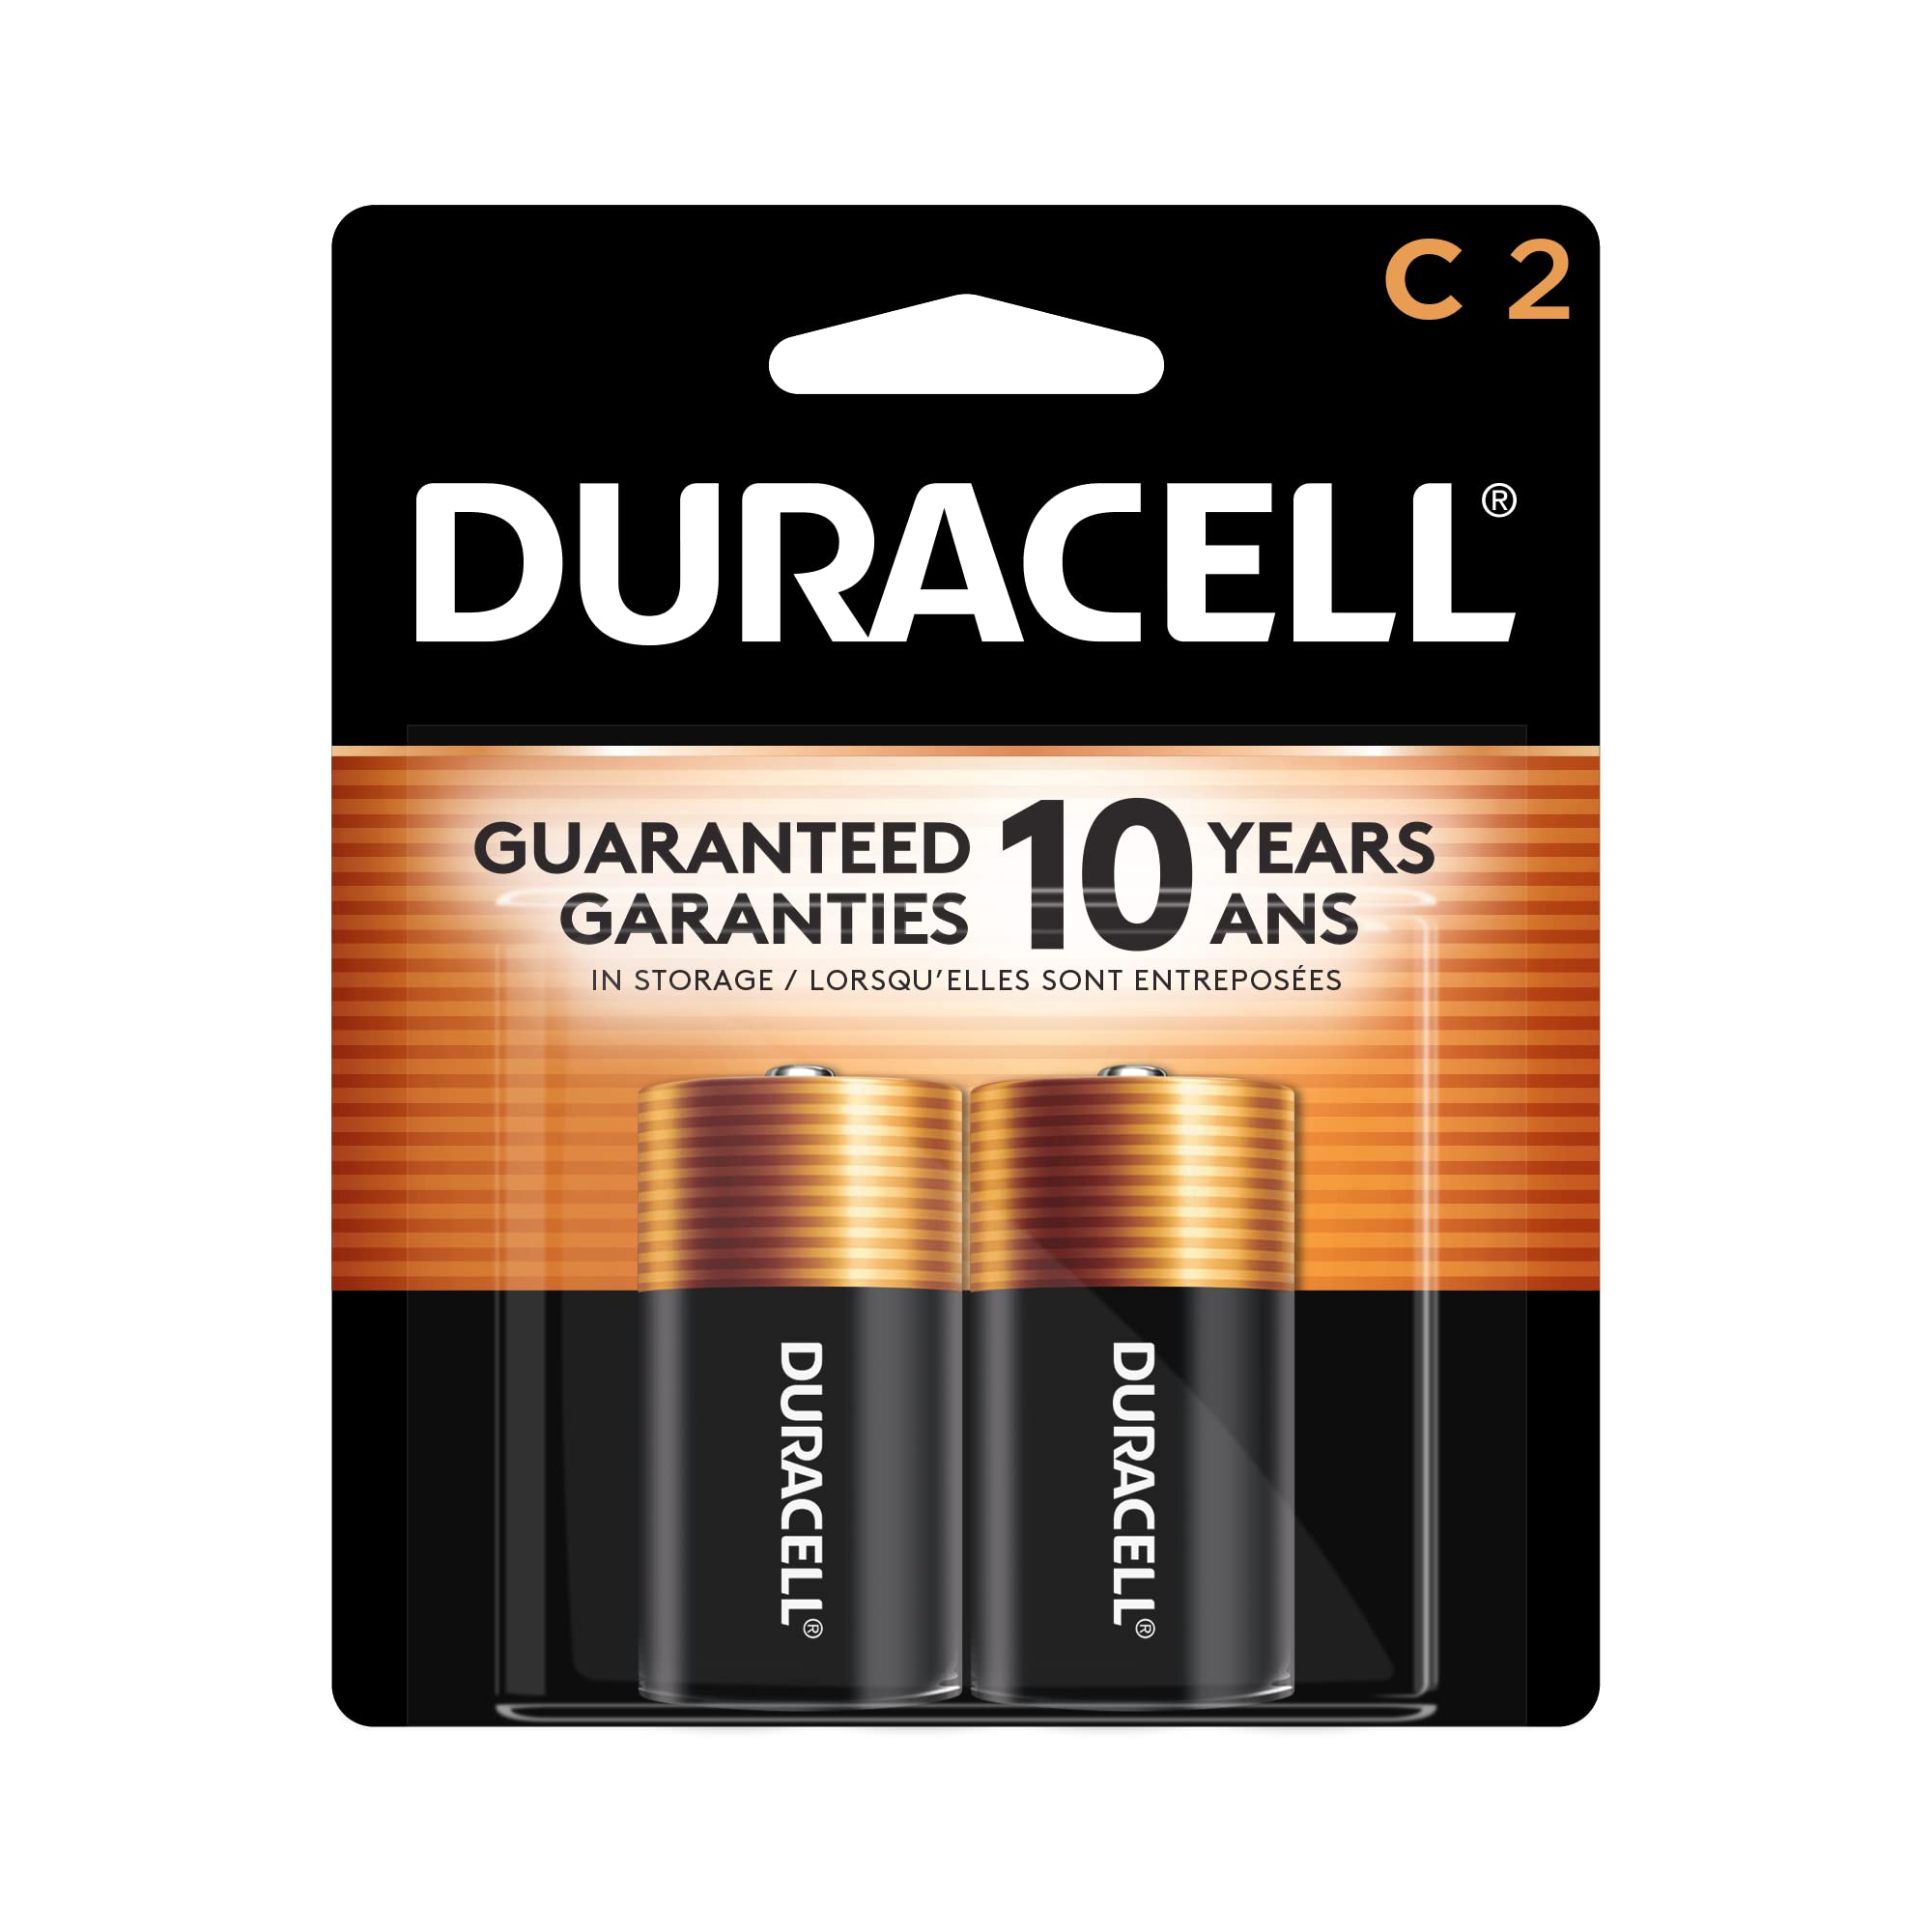 DURACELL Coppertop 1.5V Size C Alkaline Battery, (Pack of 12) - image 1 of 5